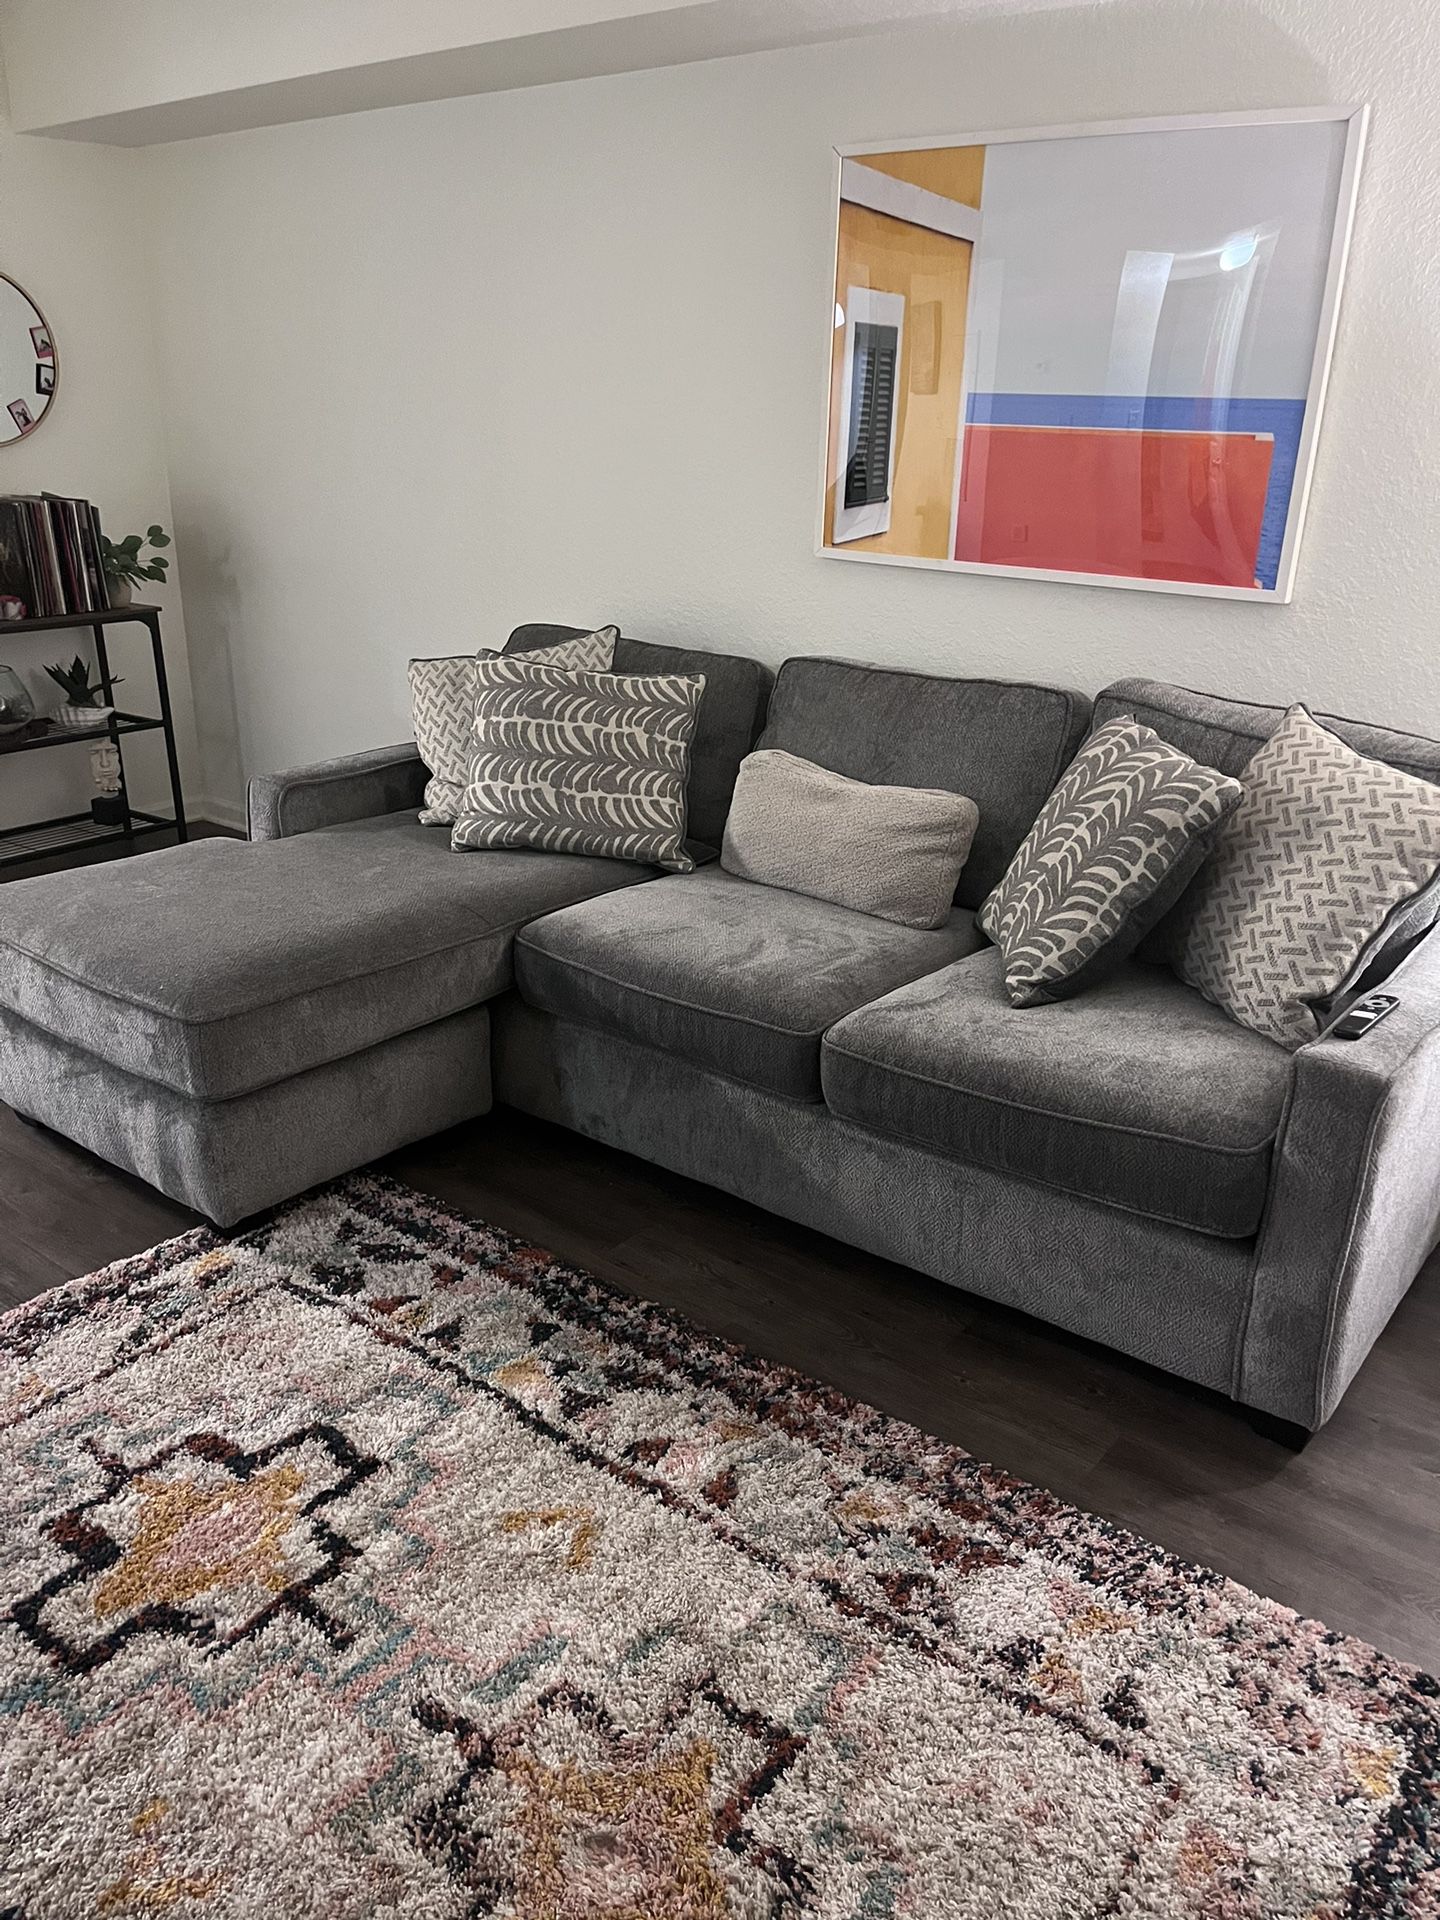 Couch and Ottoman Set!